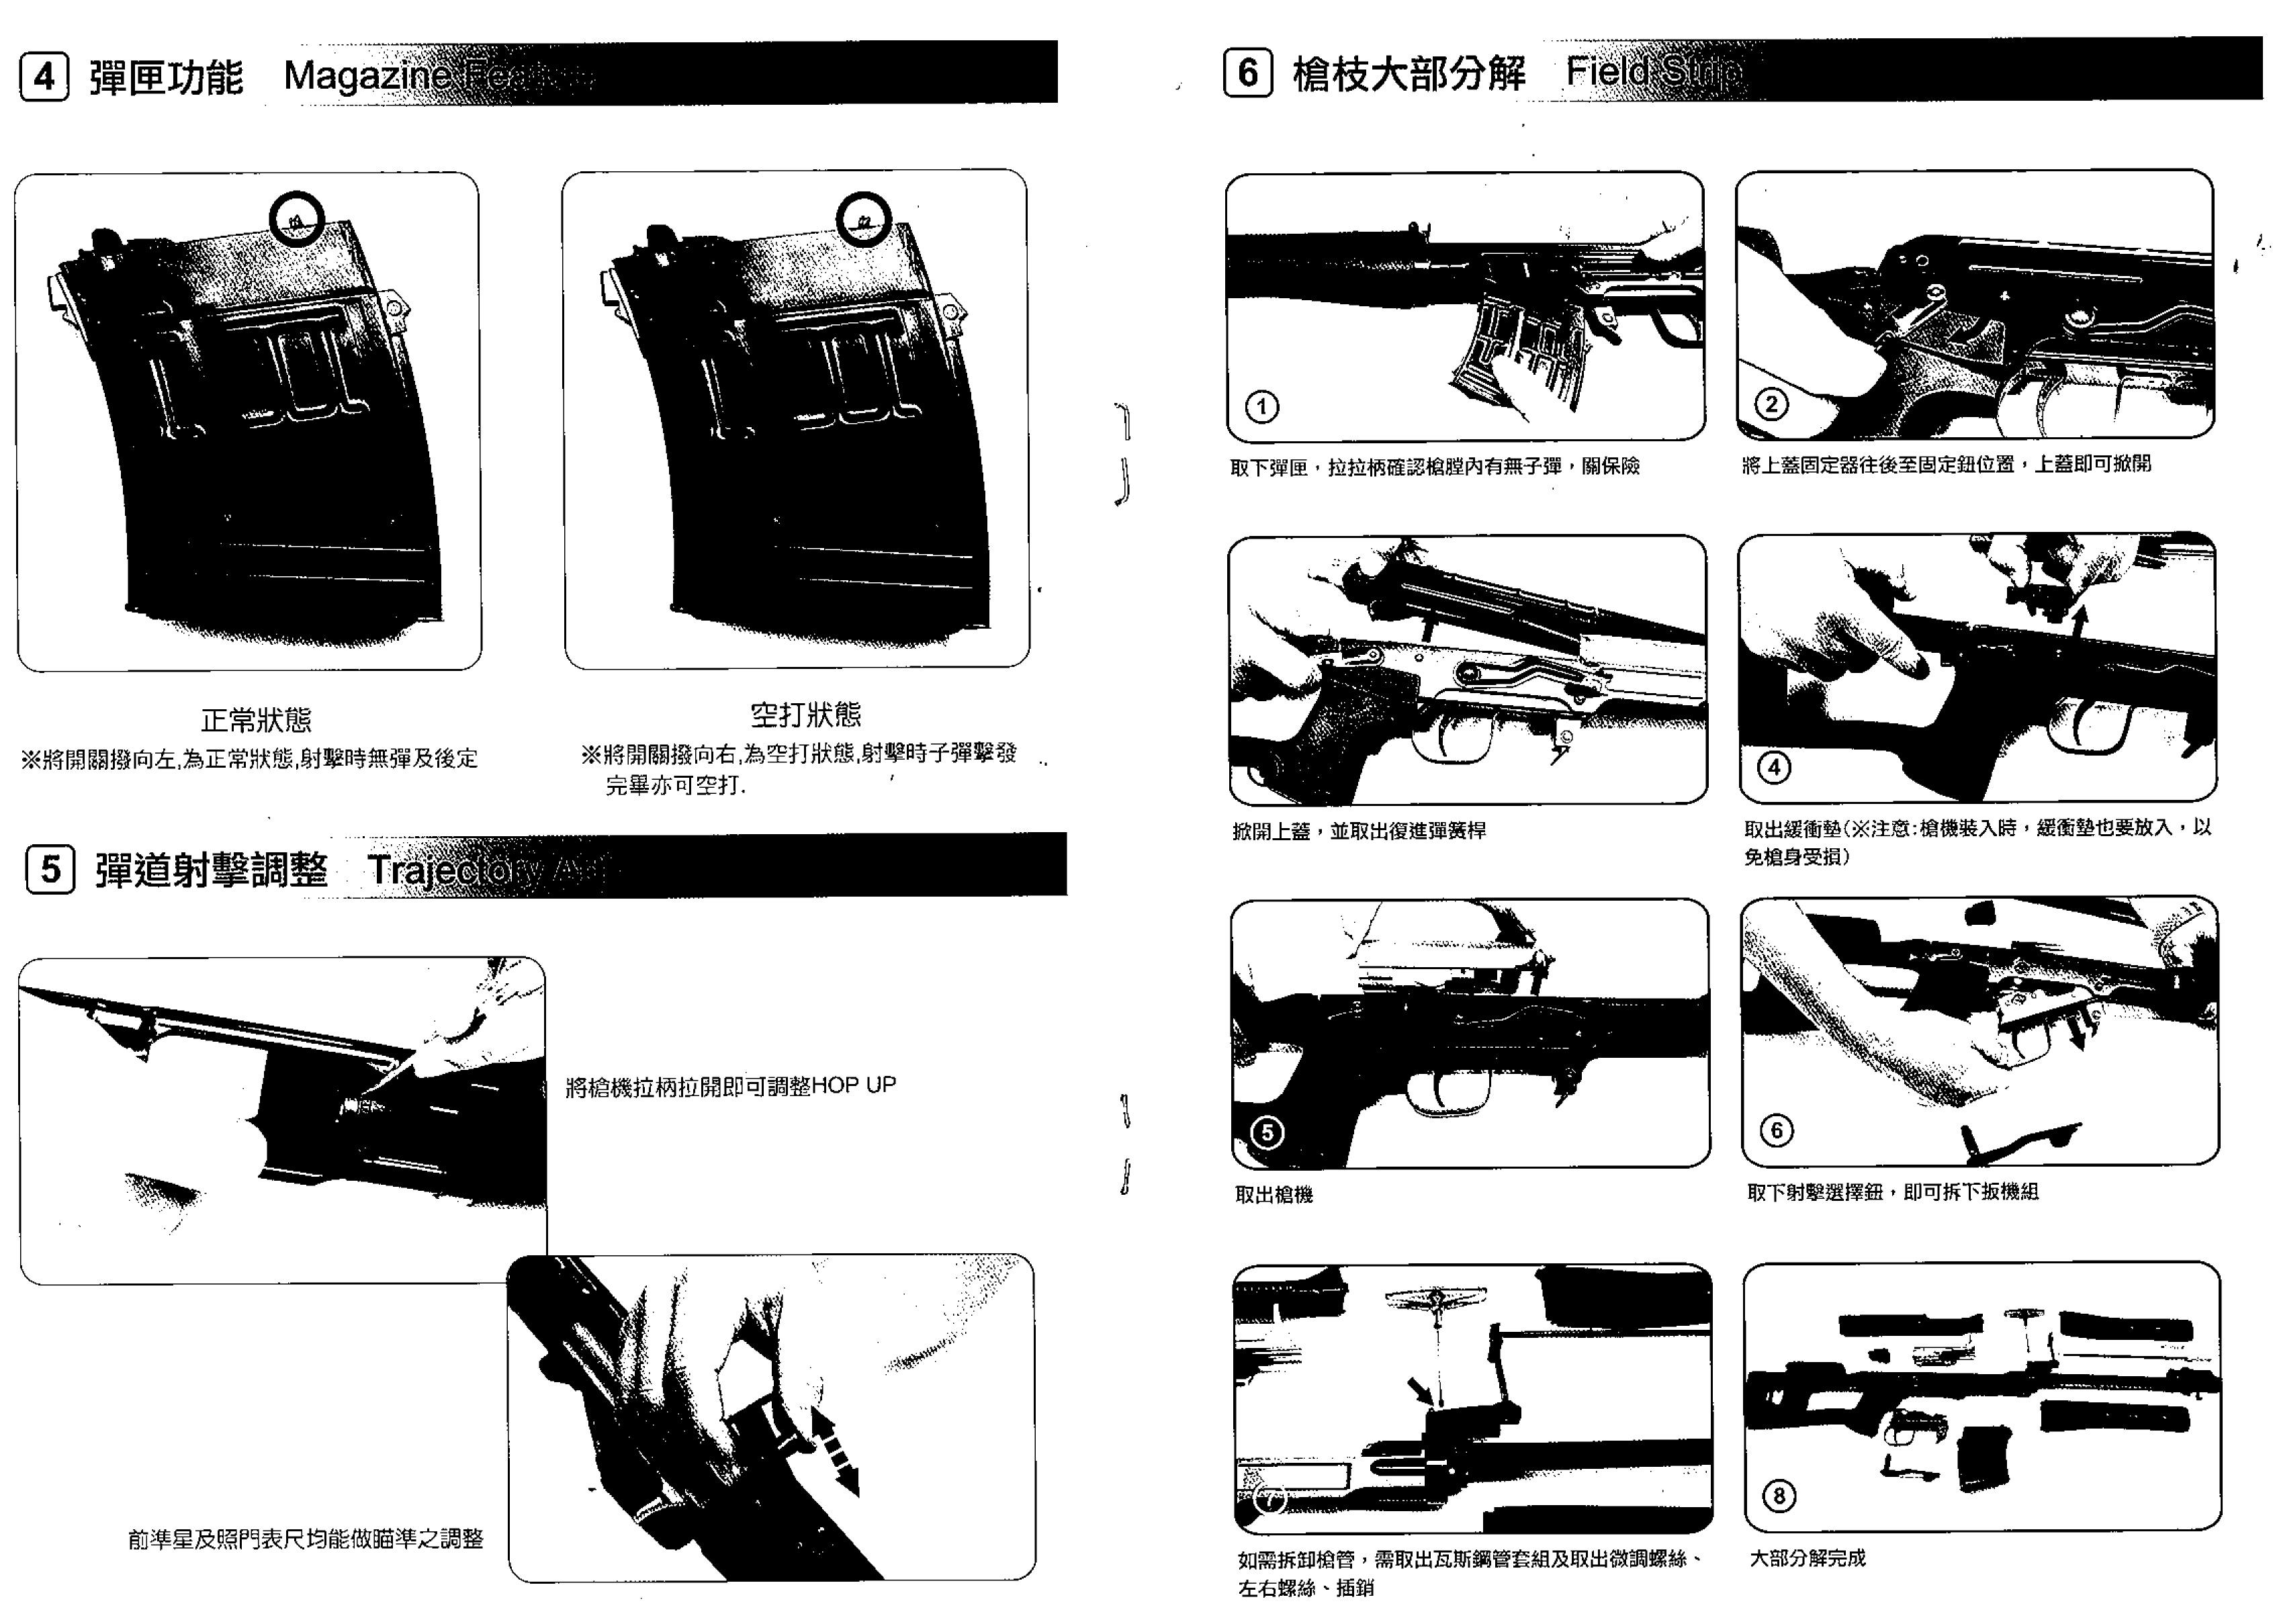 Free Download Manual For We Gbb Svd Instruction User Manual More Freebies Manuals Gun Manuals Evike Com Airsoft Superstore